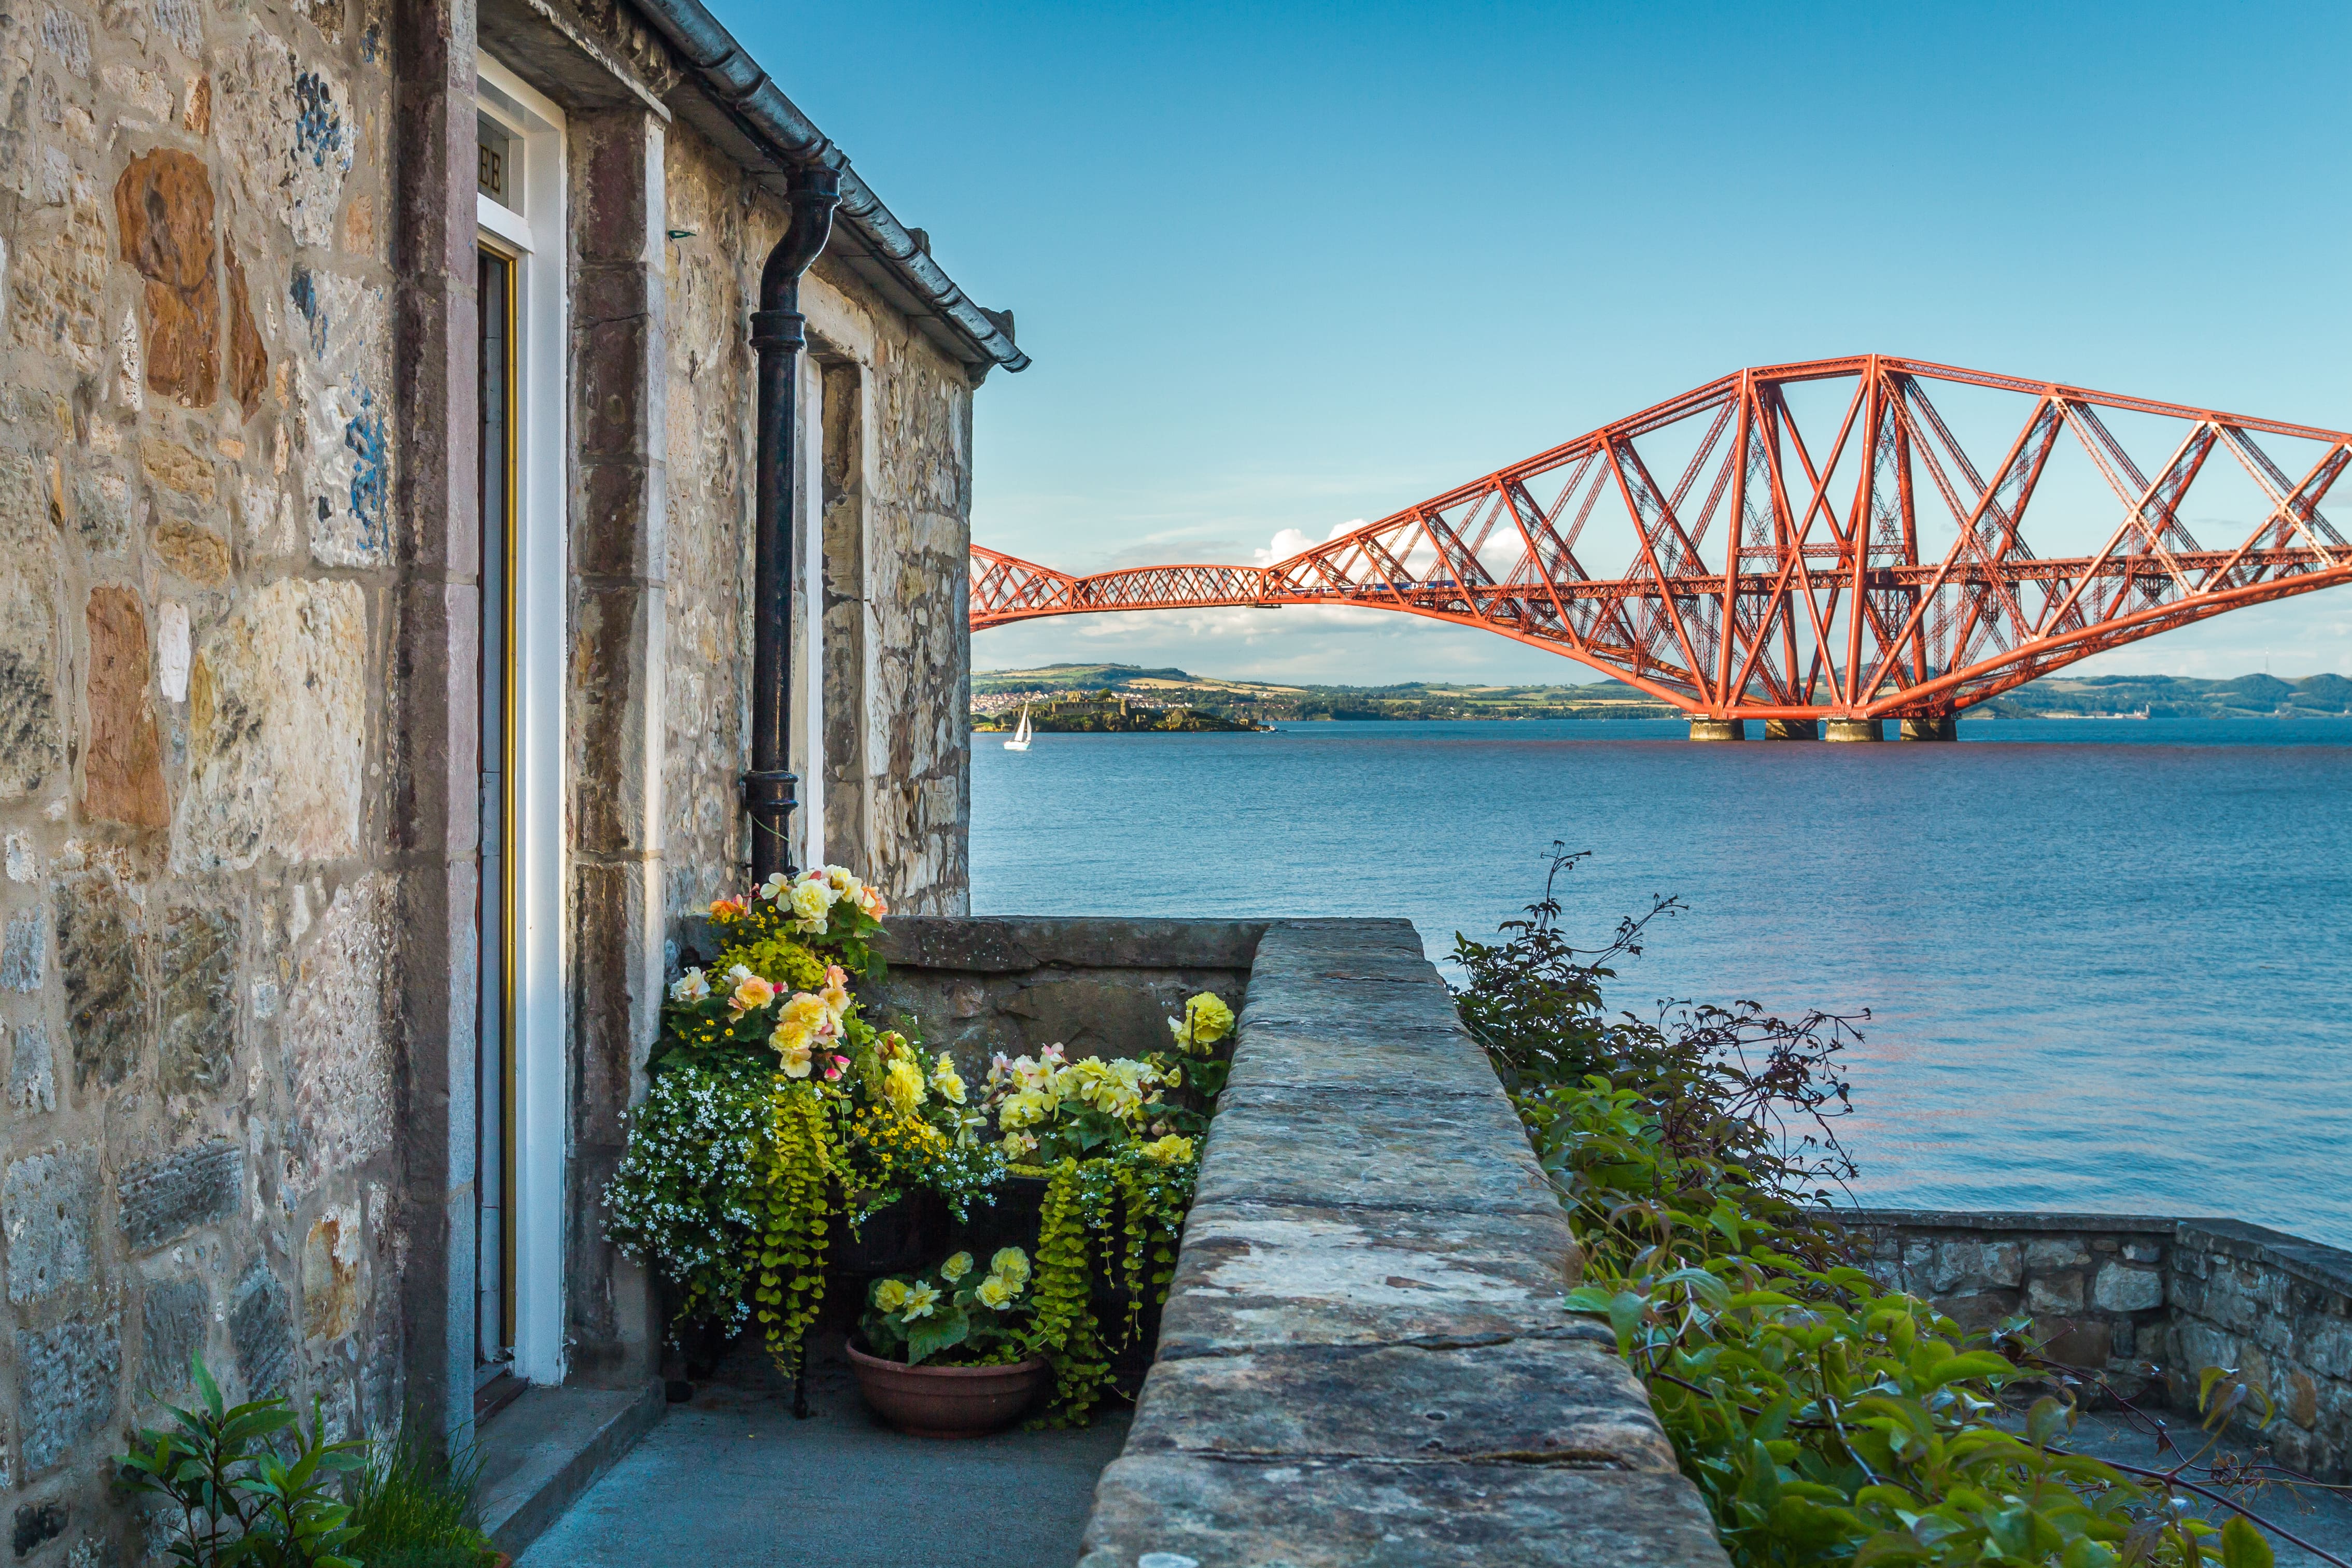 house price report may 21 forth road bridge and house